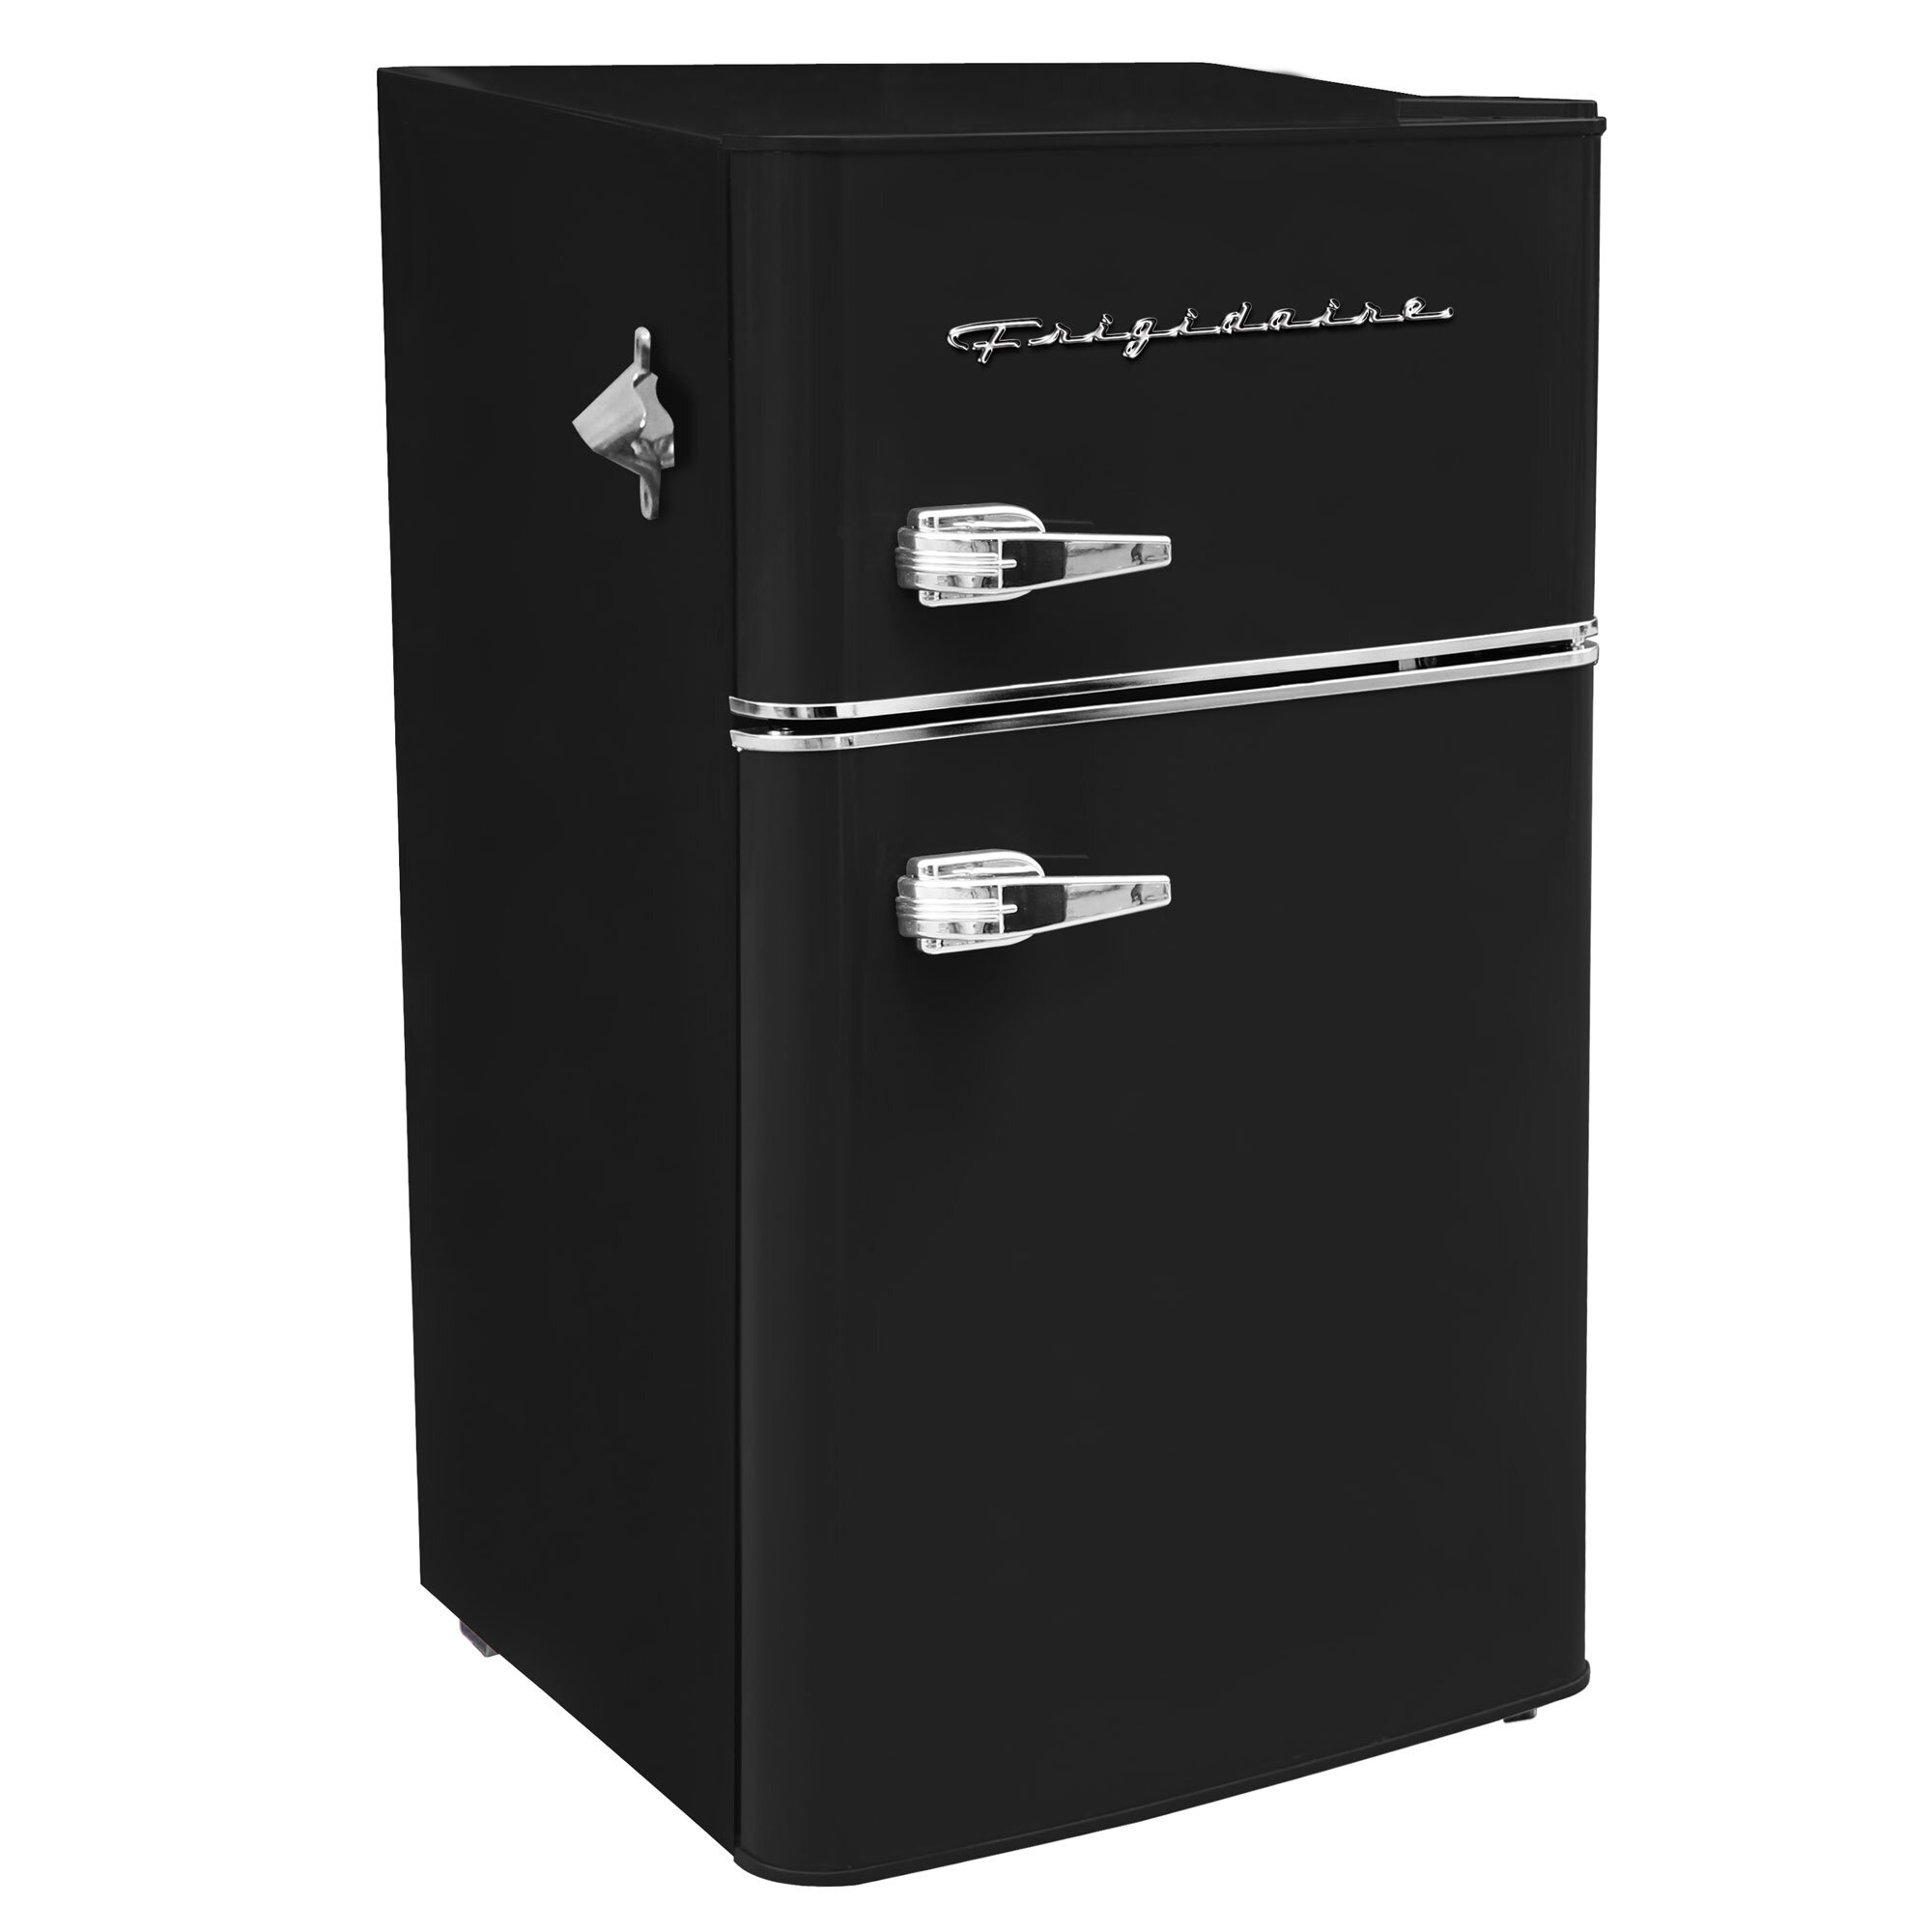 47++ Frigidaire compact fridge not cooling ideas in 2021 